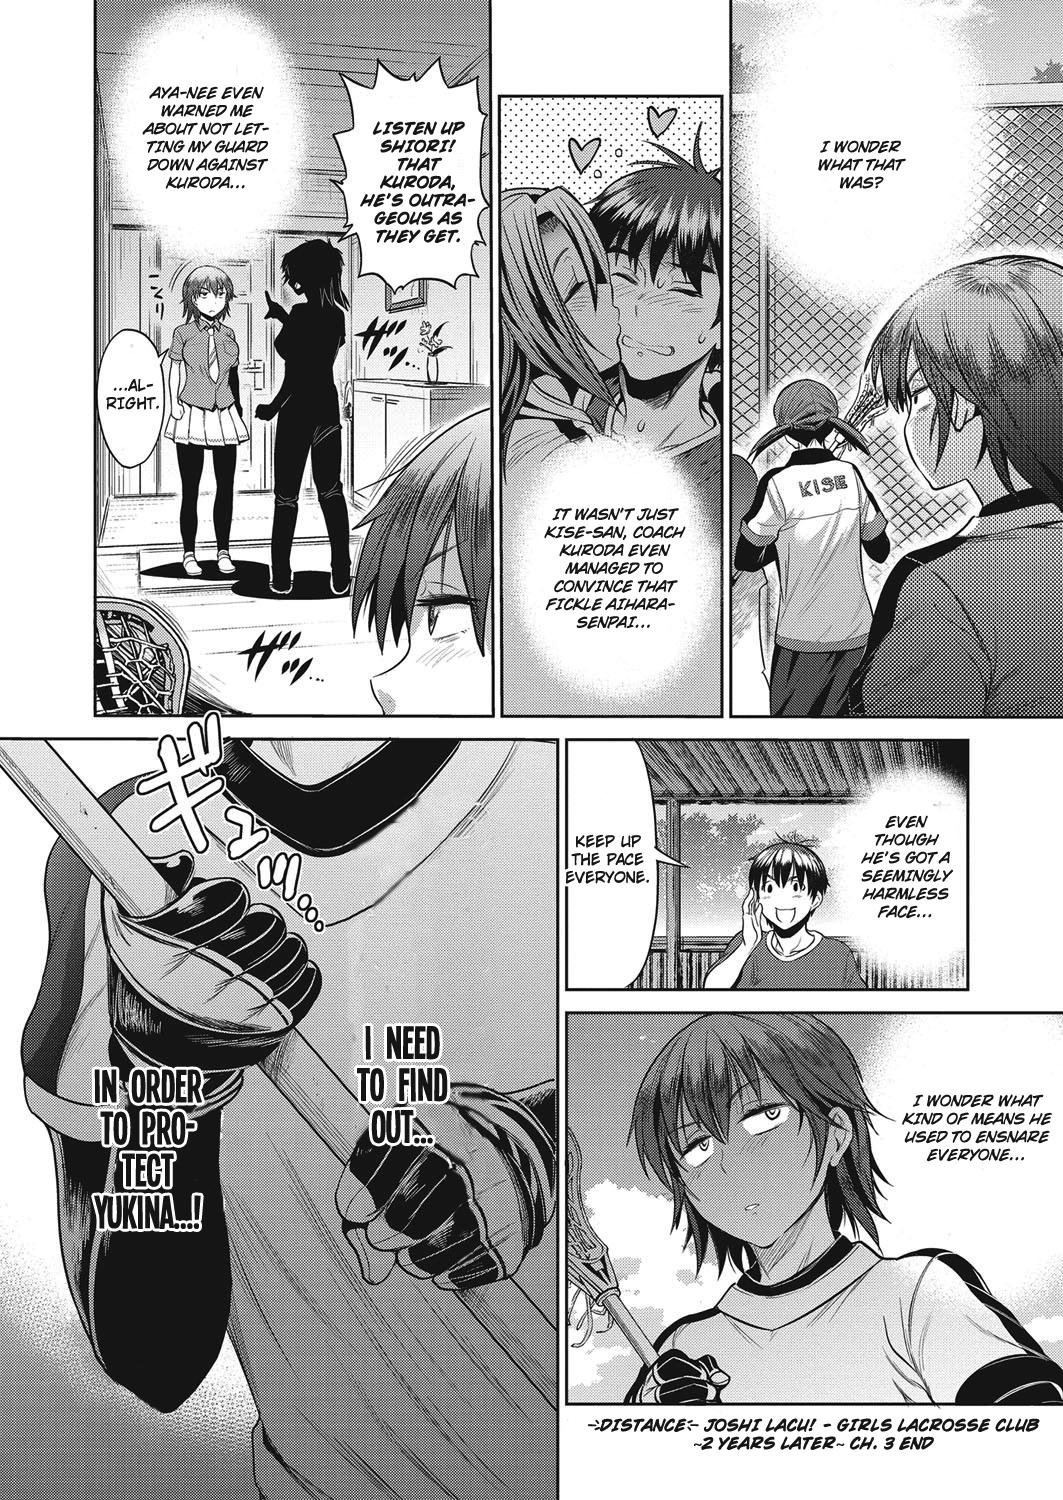 Sex Tape [DISTANCE] Joshi Lacu! - Girls Lacrosse Club ~2 Years Later~ Ch. 3 (COMIC ExE 04) [English] [TripleSevenScans] [Digital] Oiled - Page 40